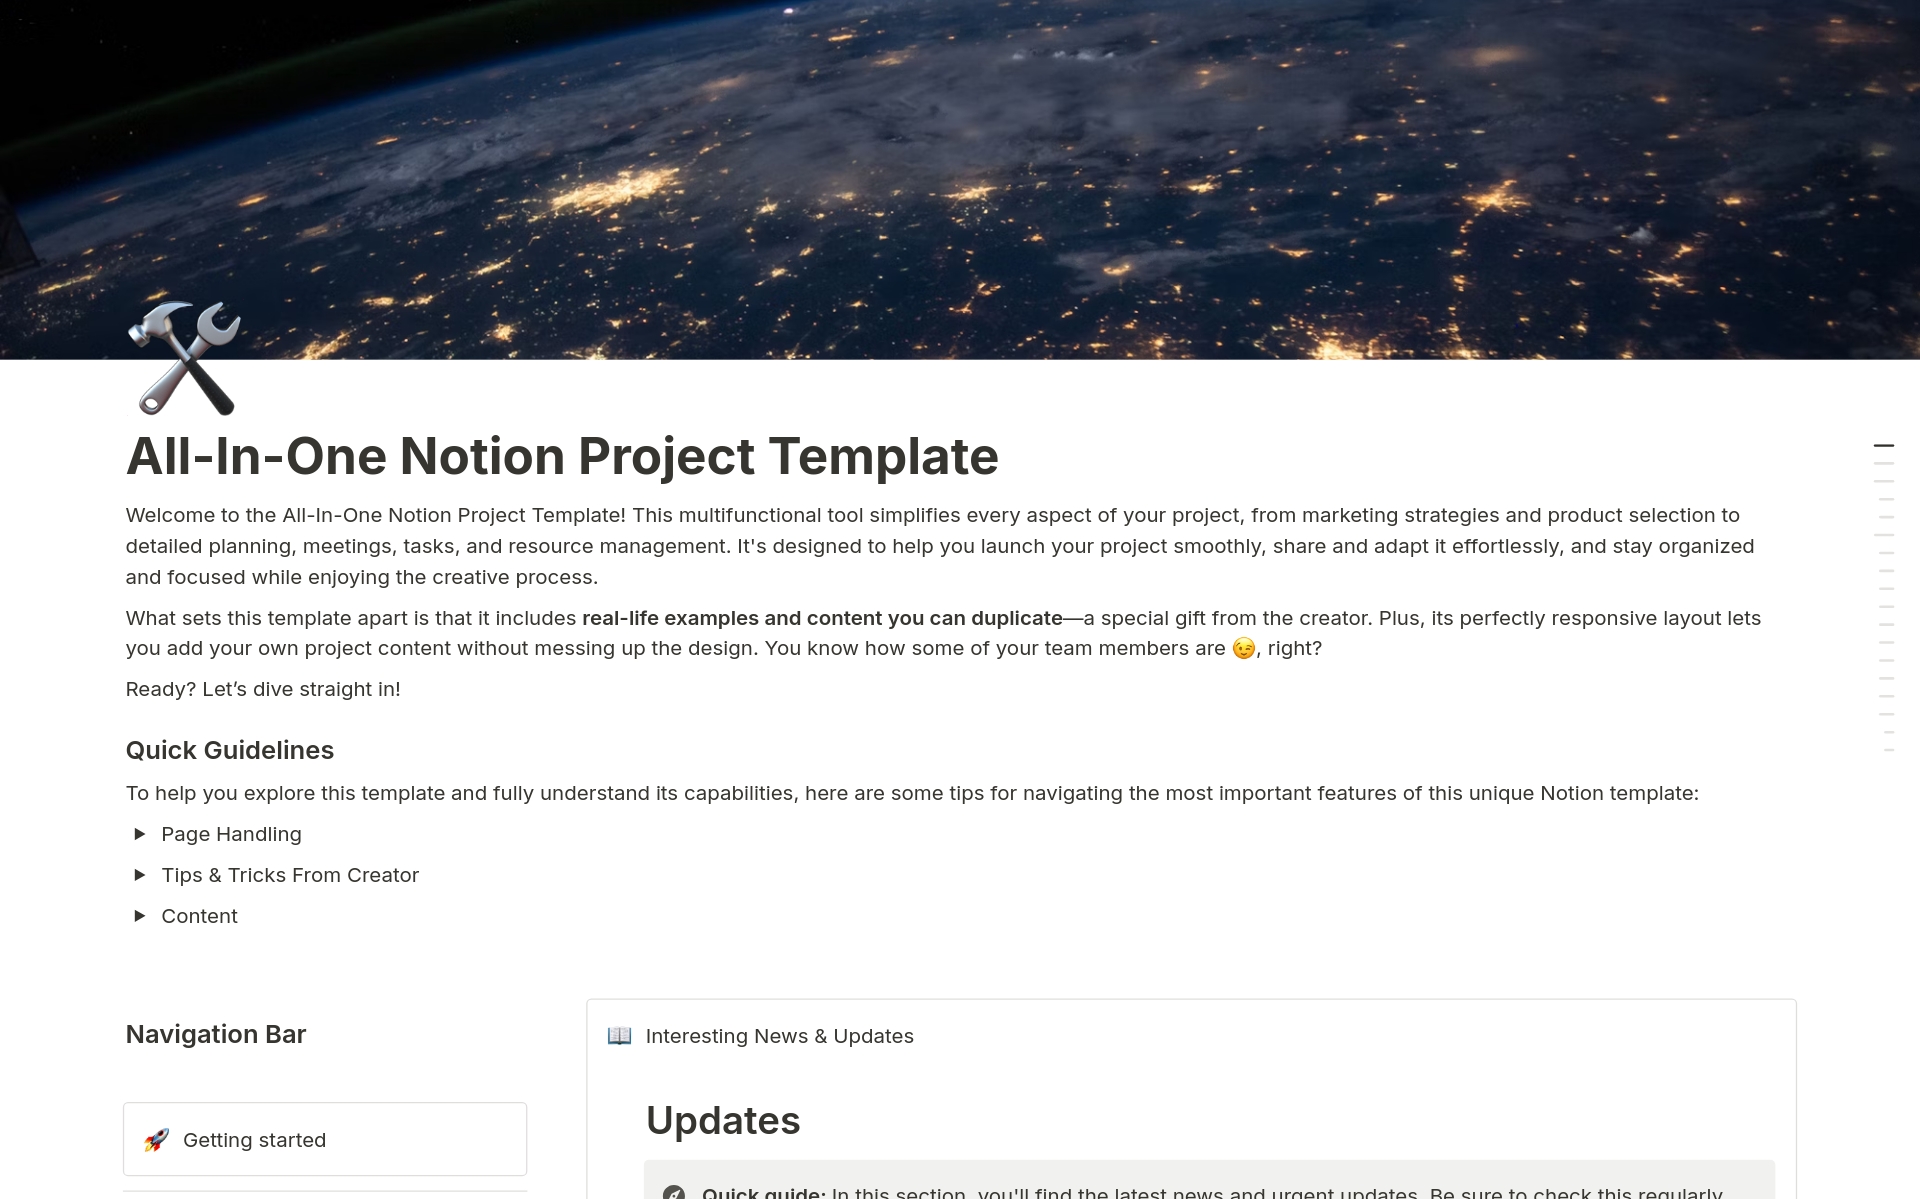 This Team Project Tool covers everything from marketing, products, meetings, and updates to a brainstorming page and more! This template can be used by a team of professionals or perfectly by a pair of friends (that's what the creator did). Enjoy, and have fun!